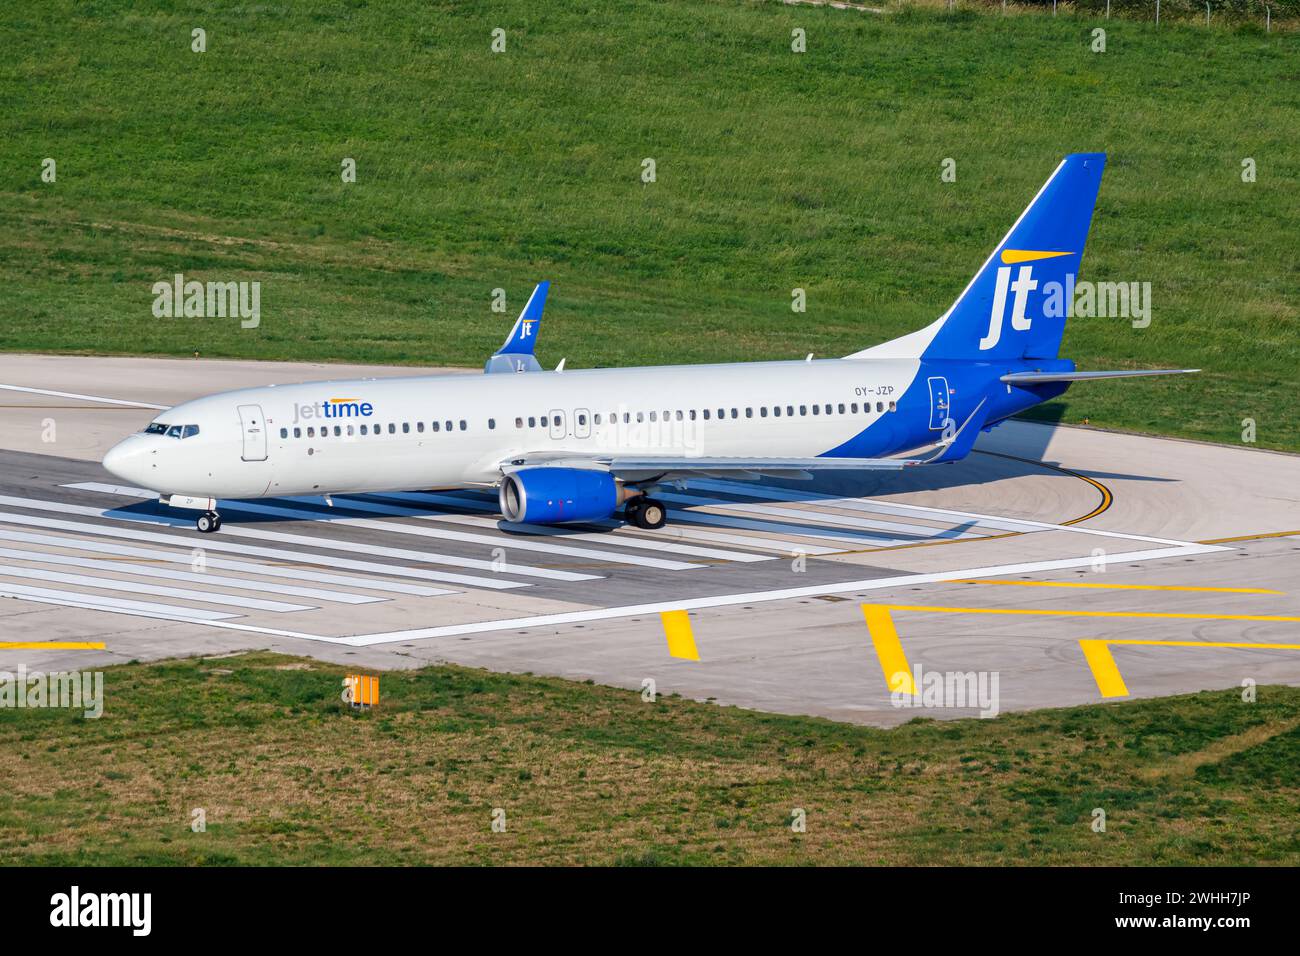 Split, Croatia - May 27, 2023: A Boeing 737-800 Jettime Aircraft With The Registration OY-JZP At Split Airport (SPU) In Croatia. Stock Photo